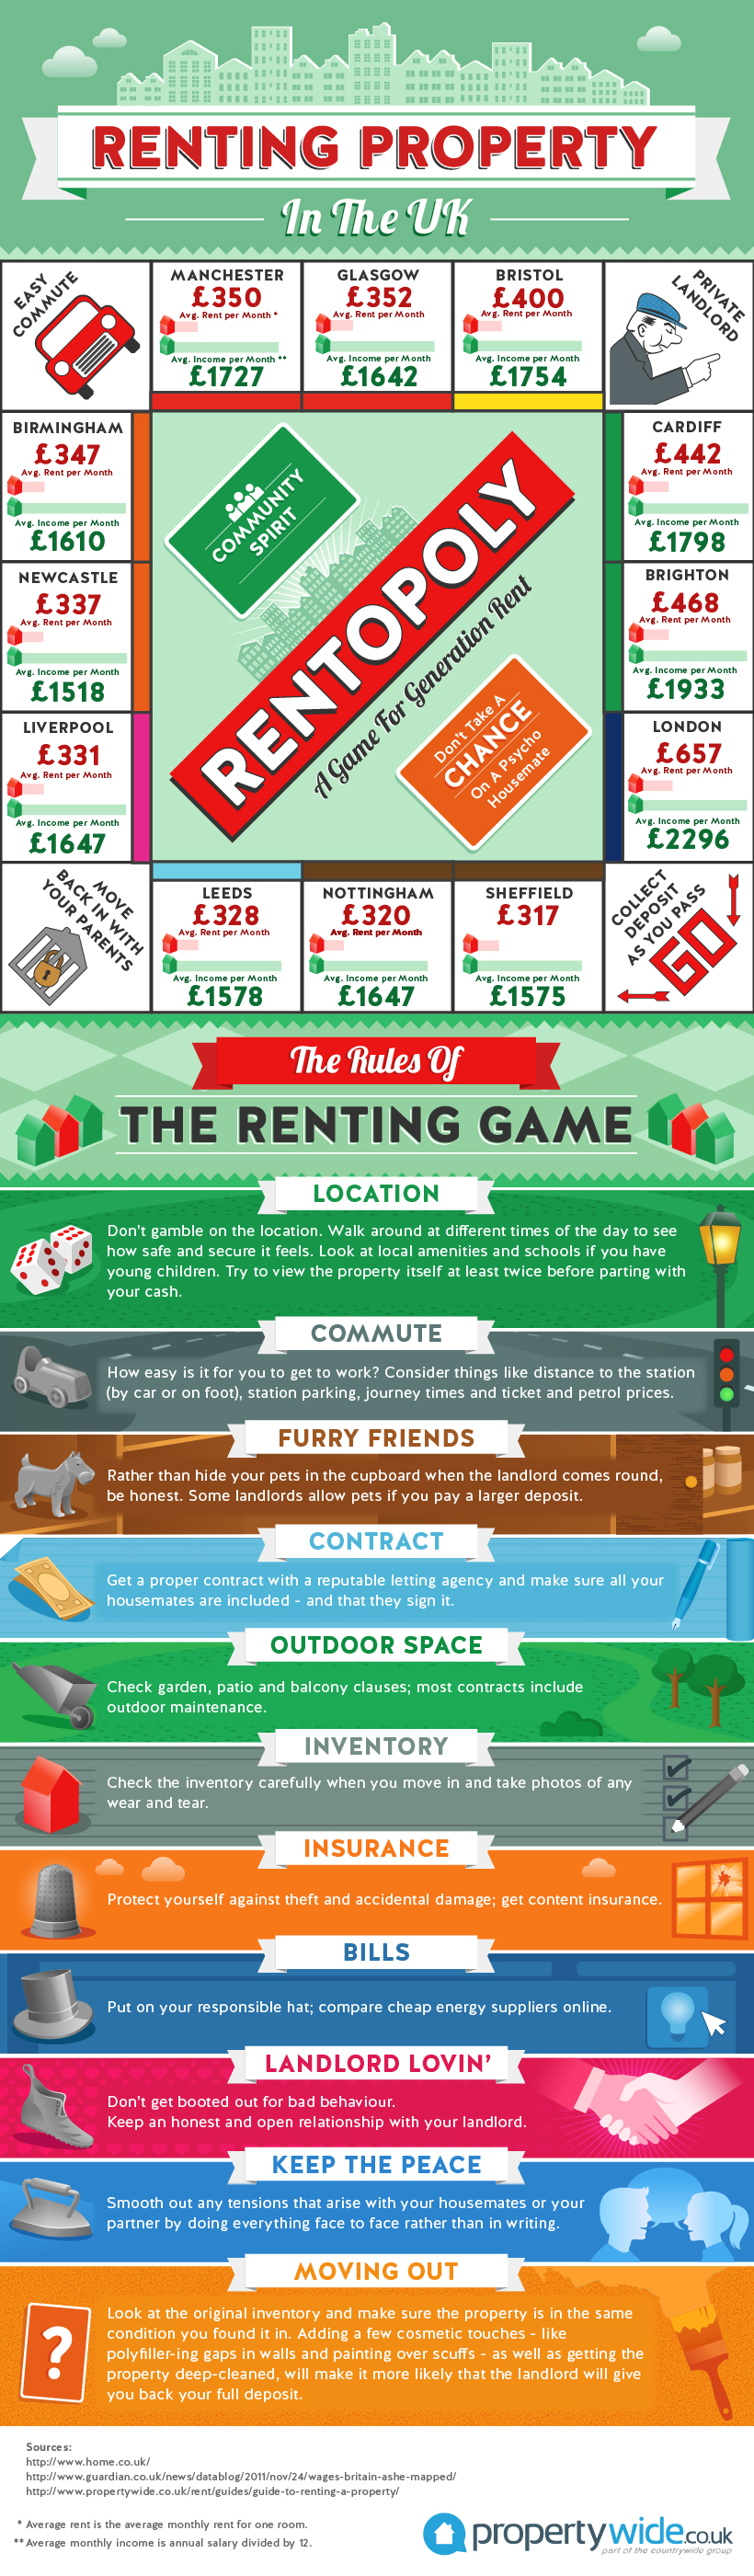 Renting_property_in_the_UK_Rentopoly_infographic